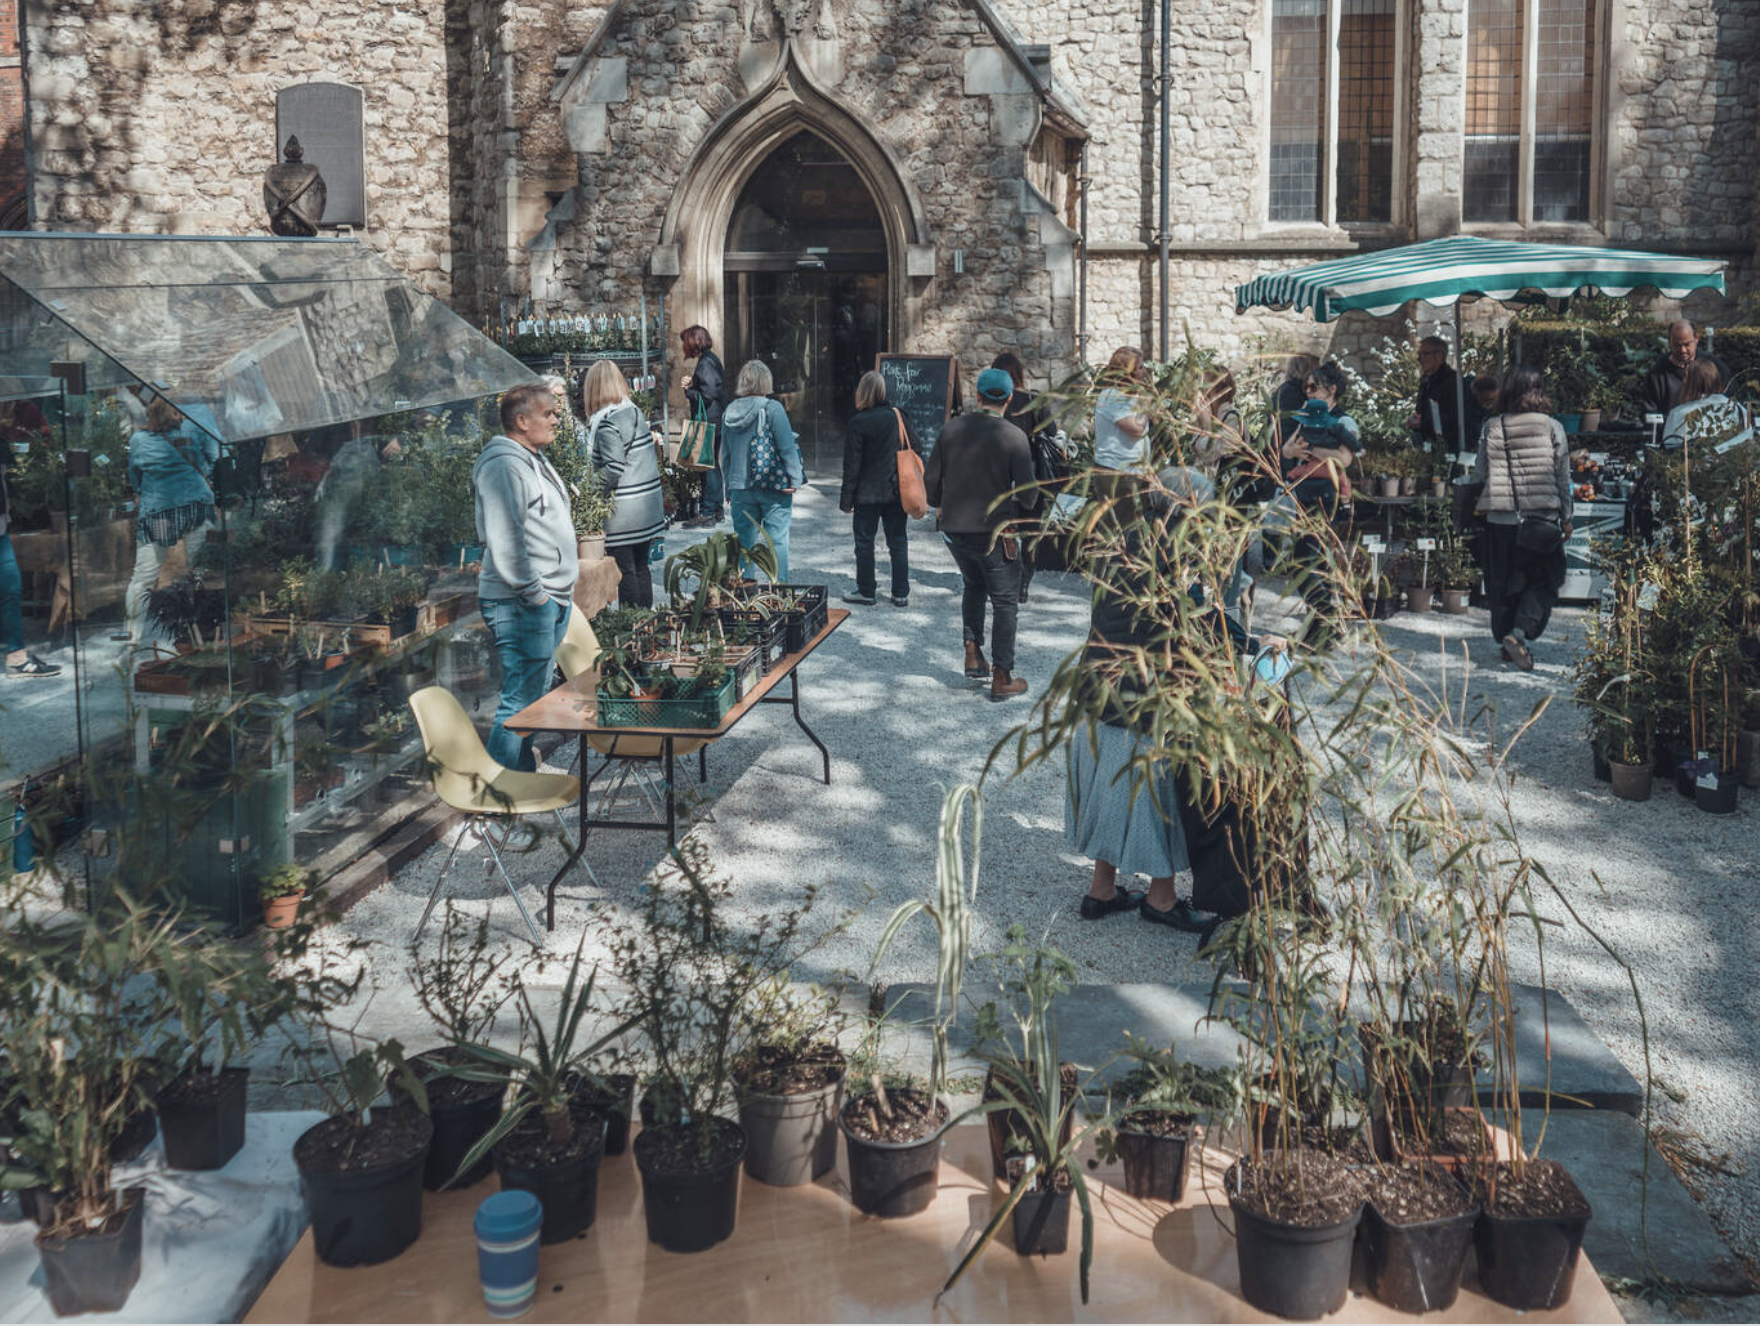 The Garden Museum is hosting a Spring plant fair